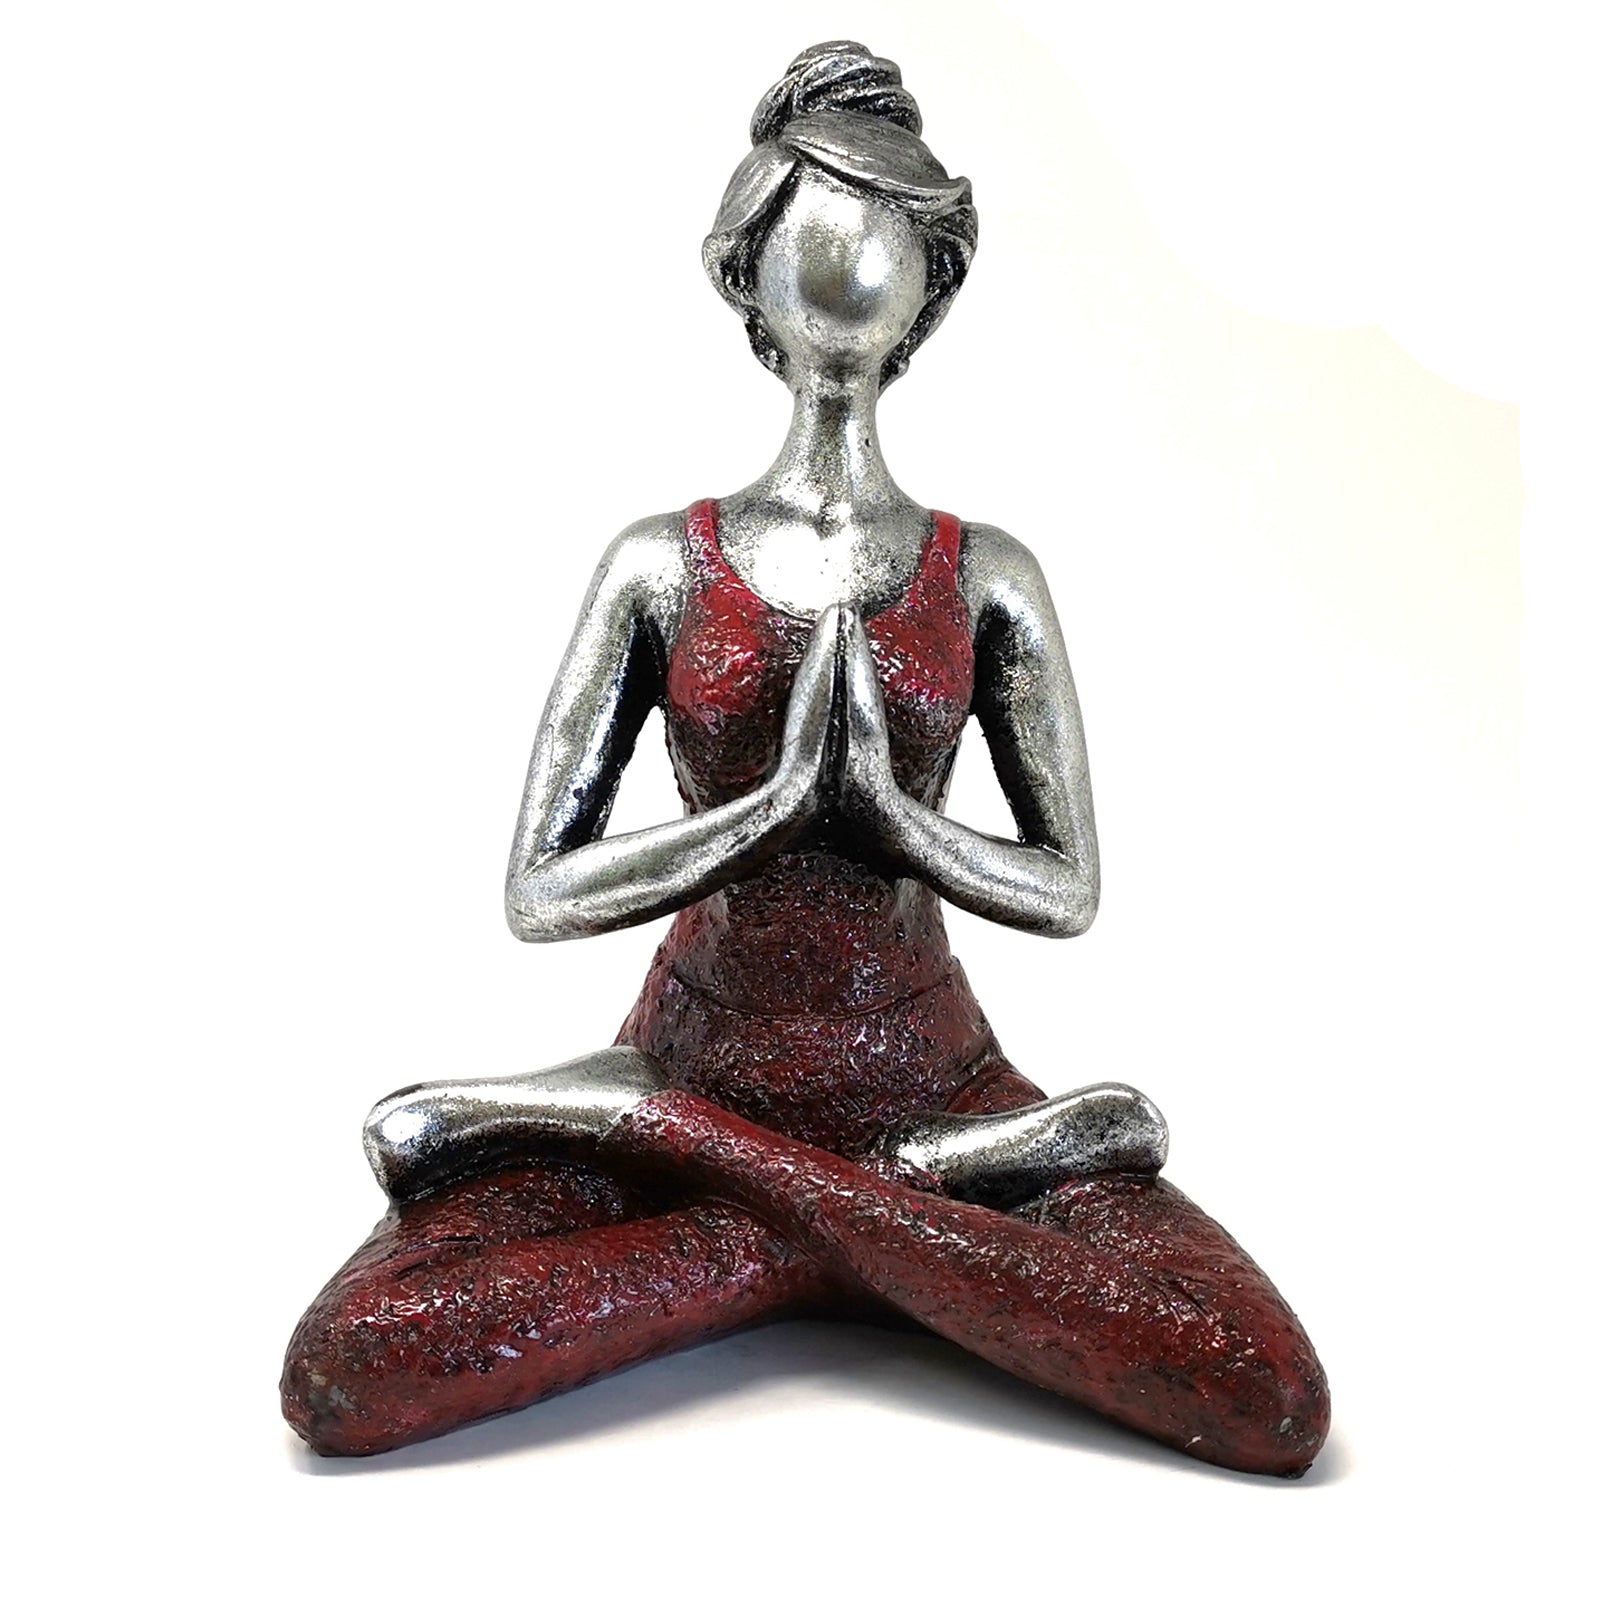 Yoga Lady Figure - Silver and Bordeaux (24cm high)